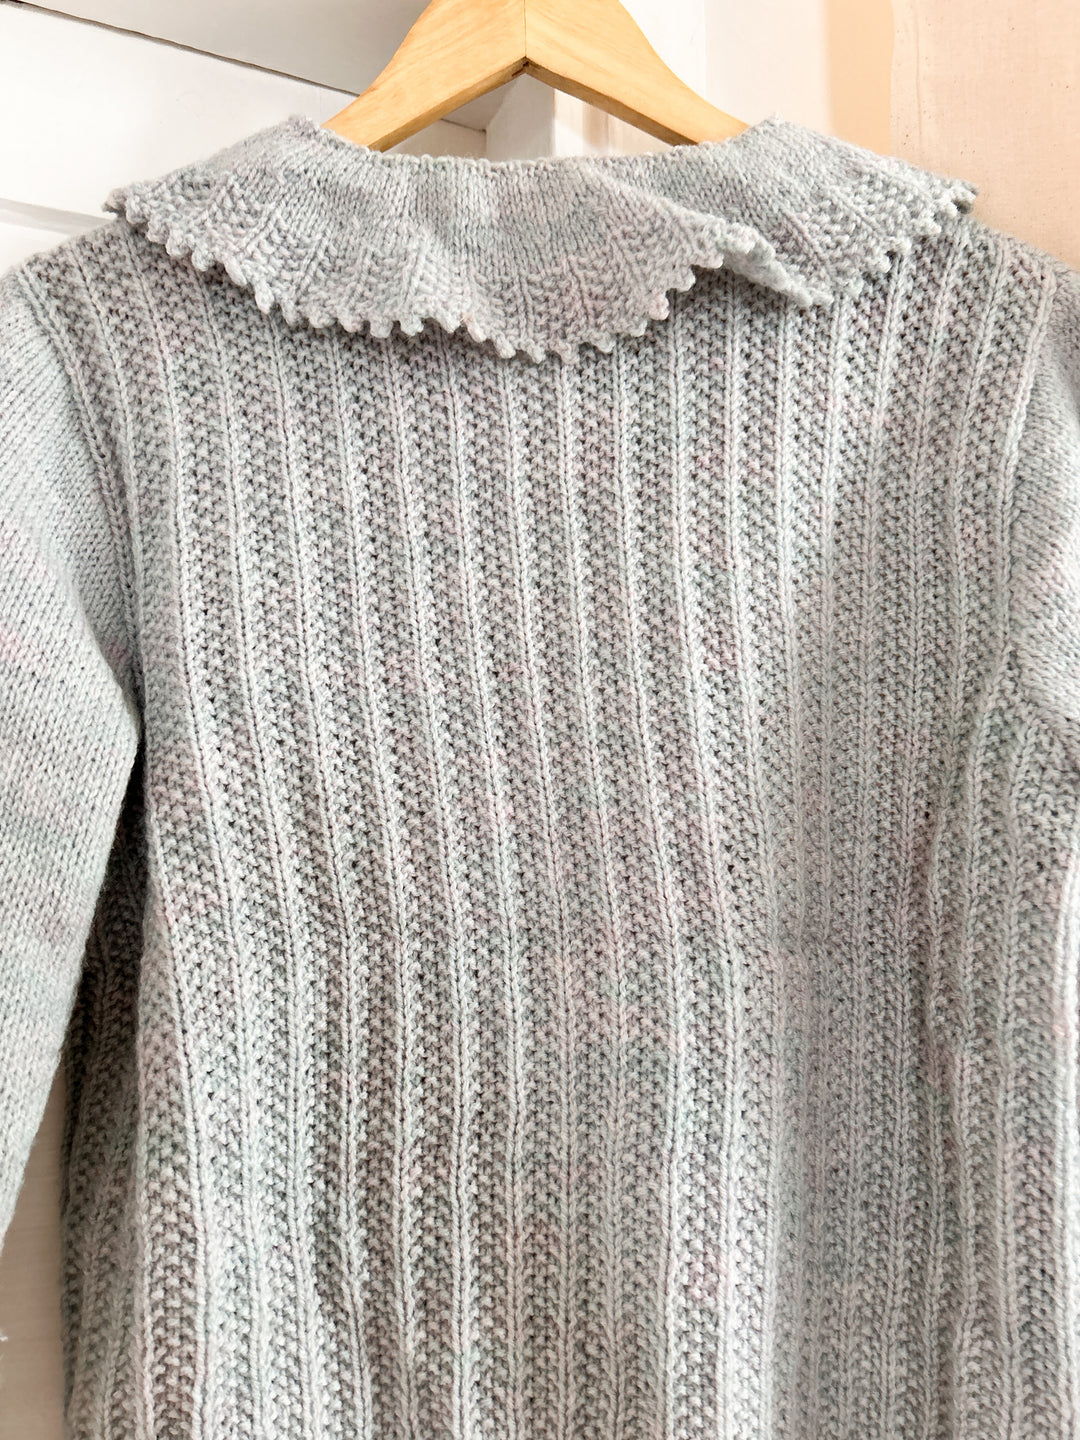 Pastel vintage 70s hand knitted sweater